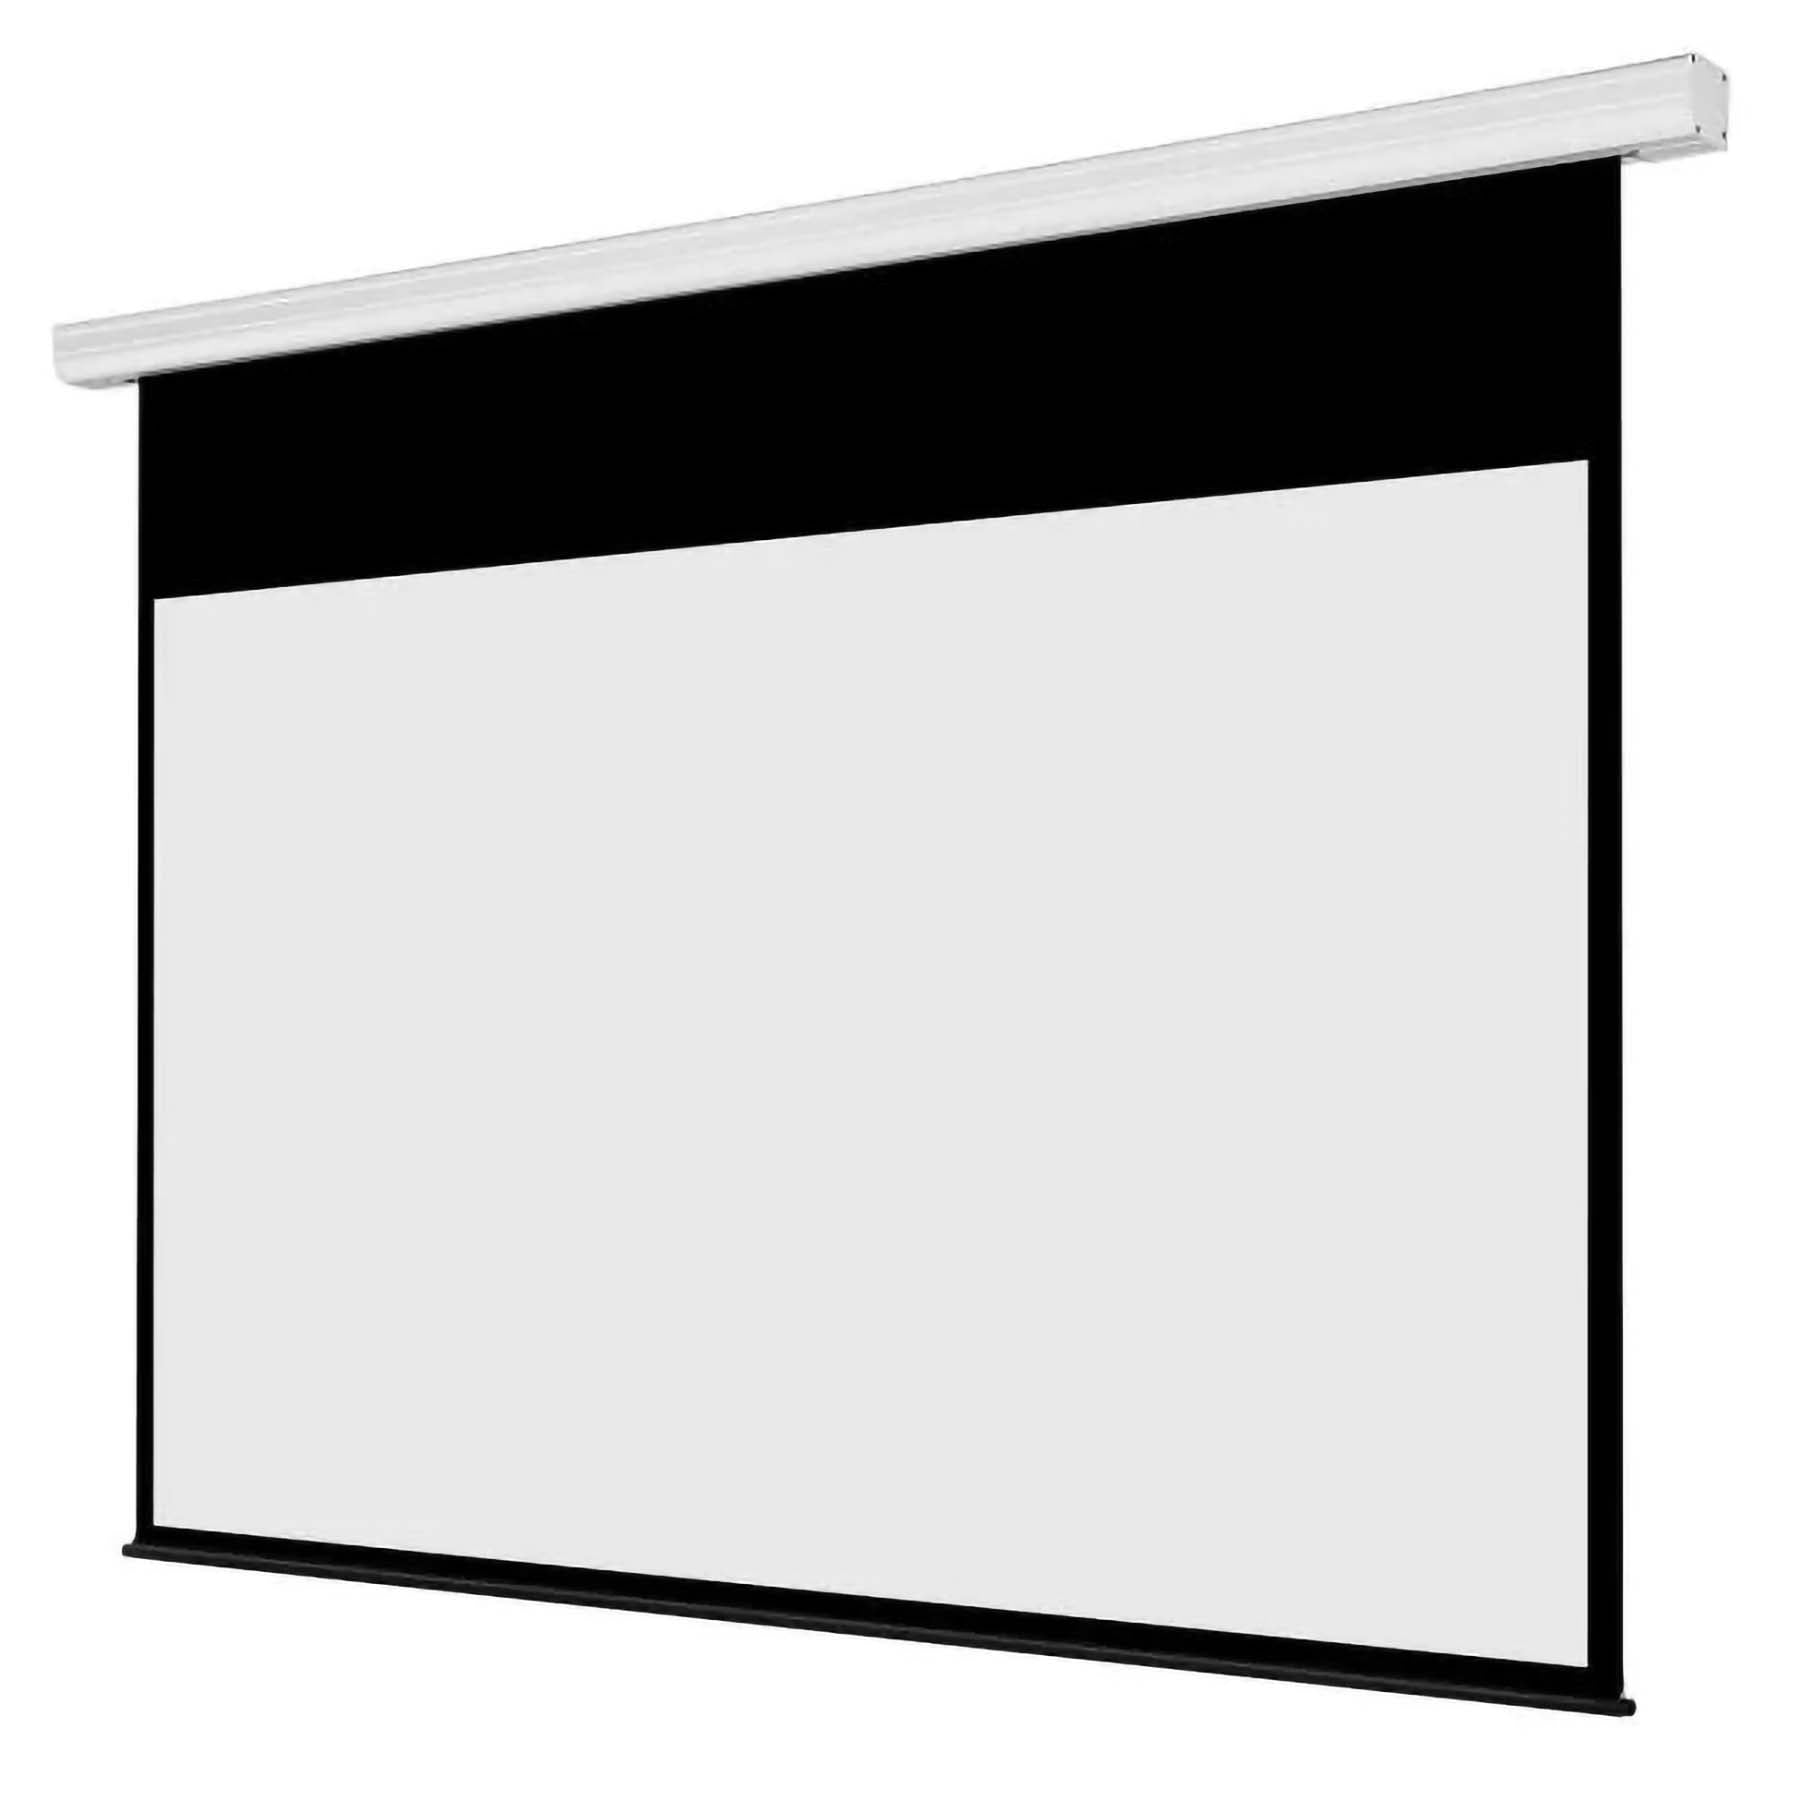 Encore Screens 16:9 CineMotion Pro - Motorised Screen with RF & Wall Control